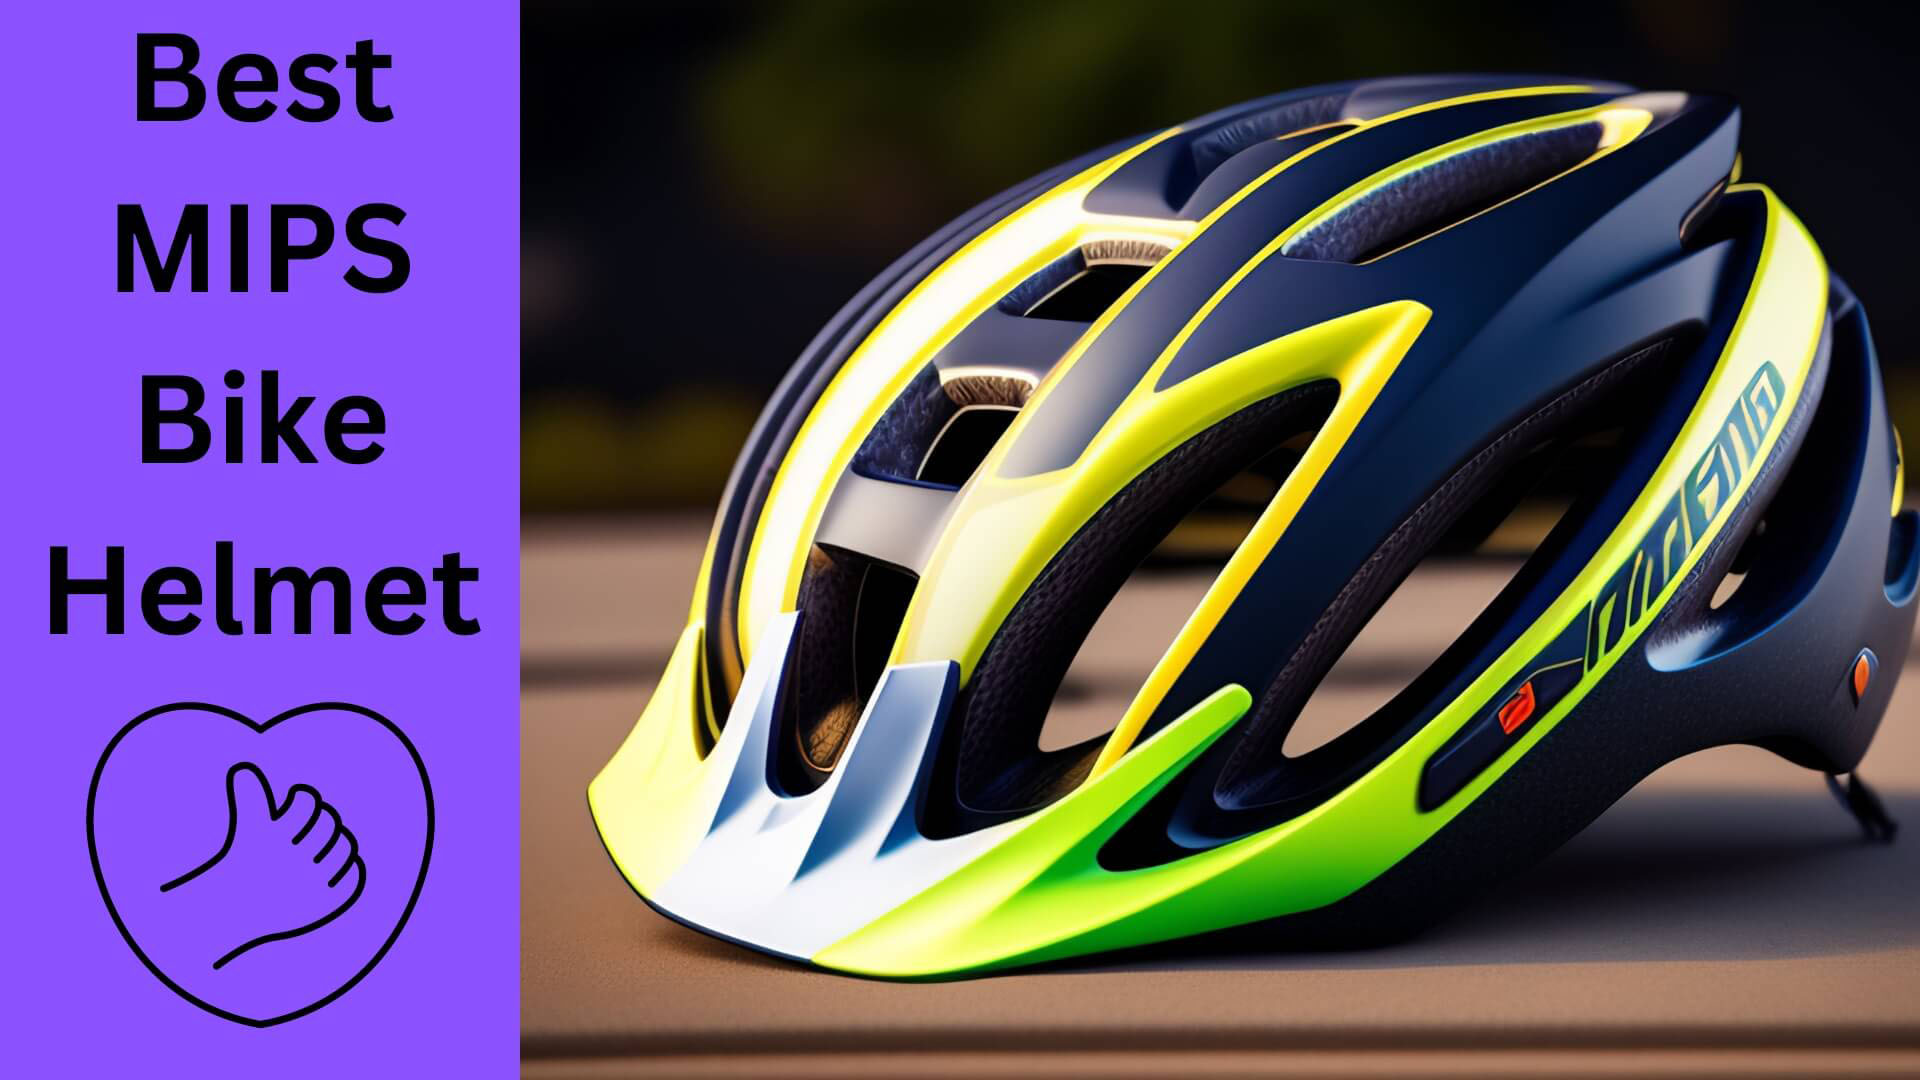 8 Best MIPS Bike Helmets for Protection and Comfort